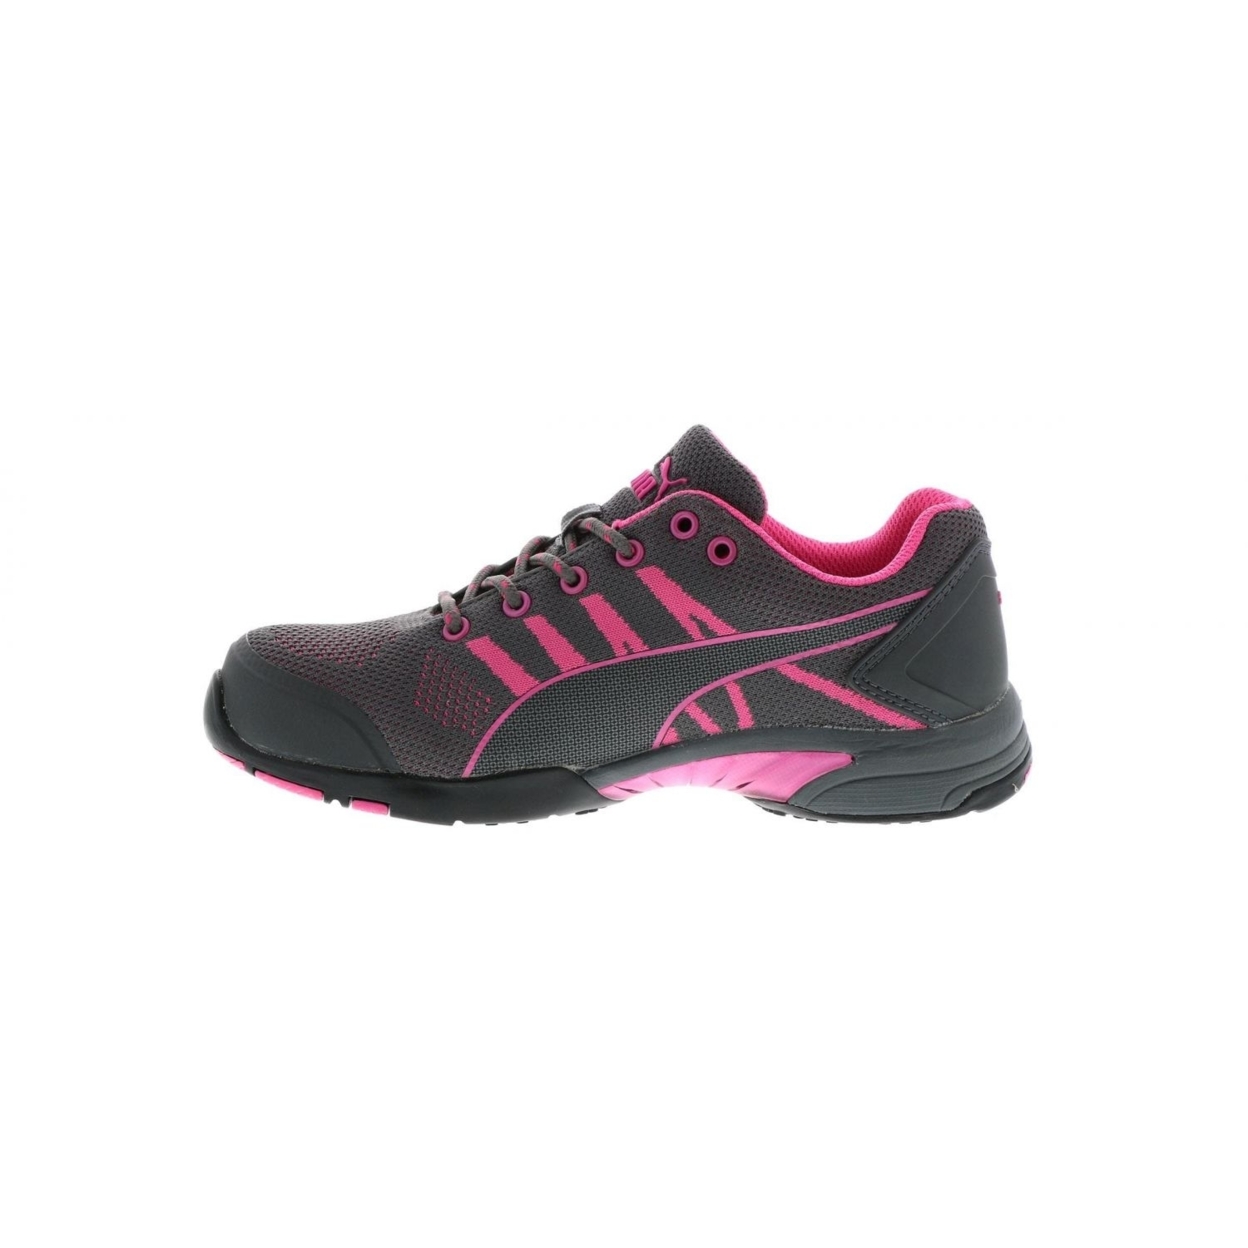 PUMA Safety Women's Celerity Knit Low Steel Toe ESD Work Shoe Pink - 642915 ONE SIZE PINK - PINK, 8